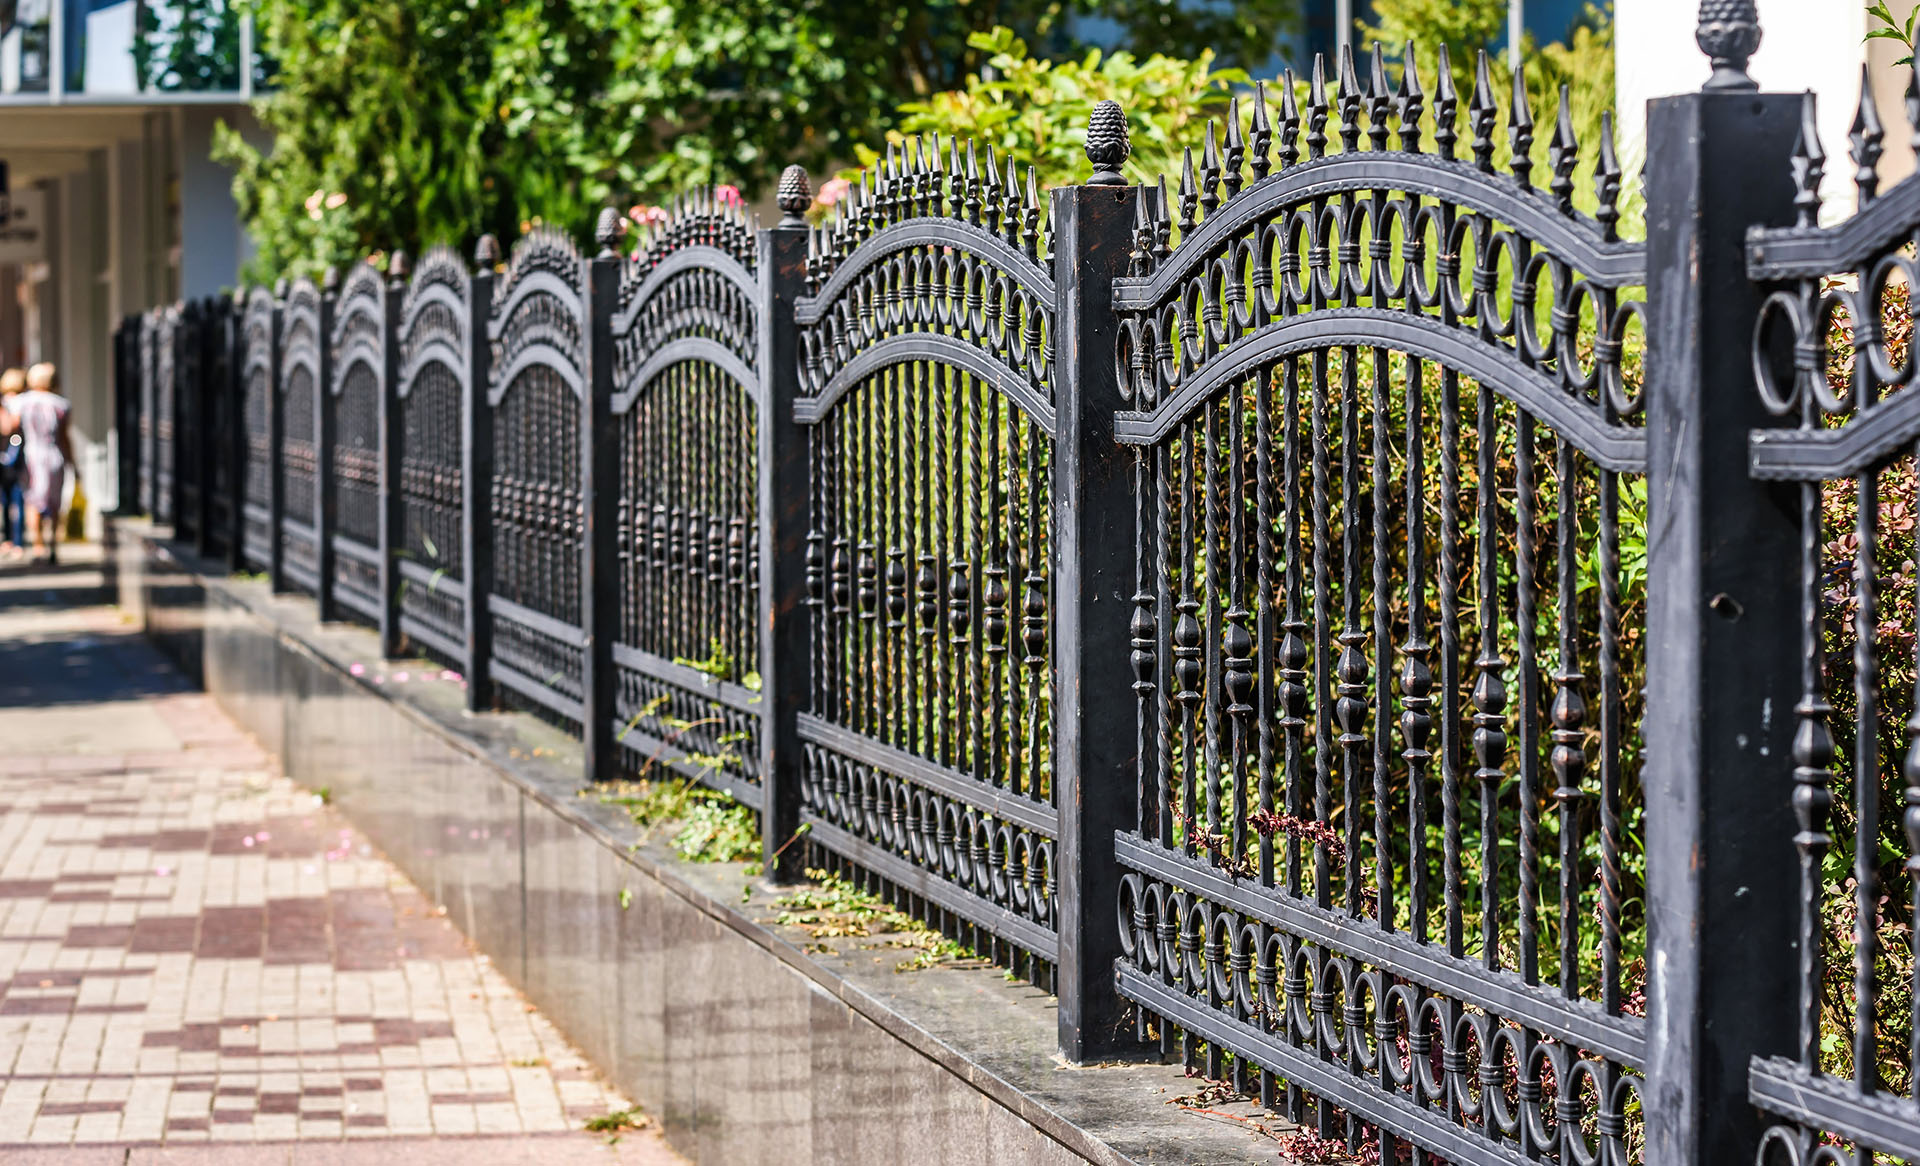 Fencing In Auckland